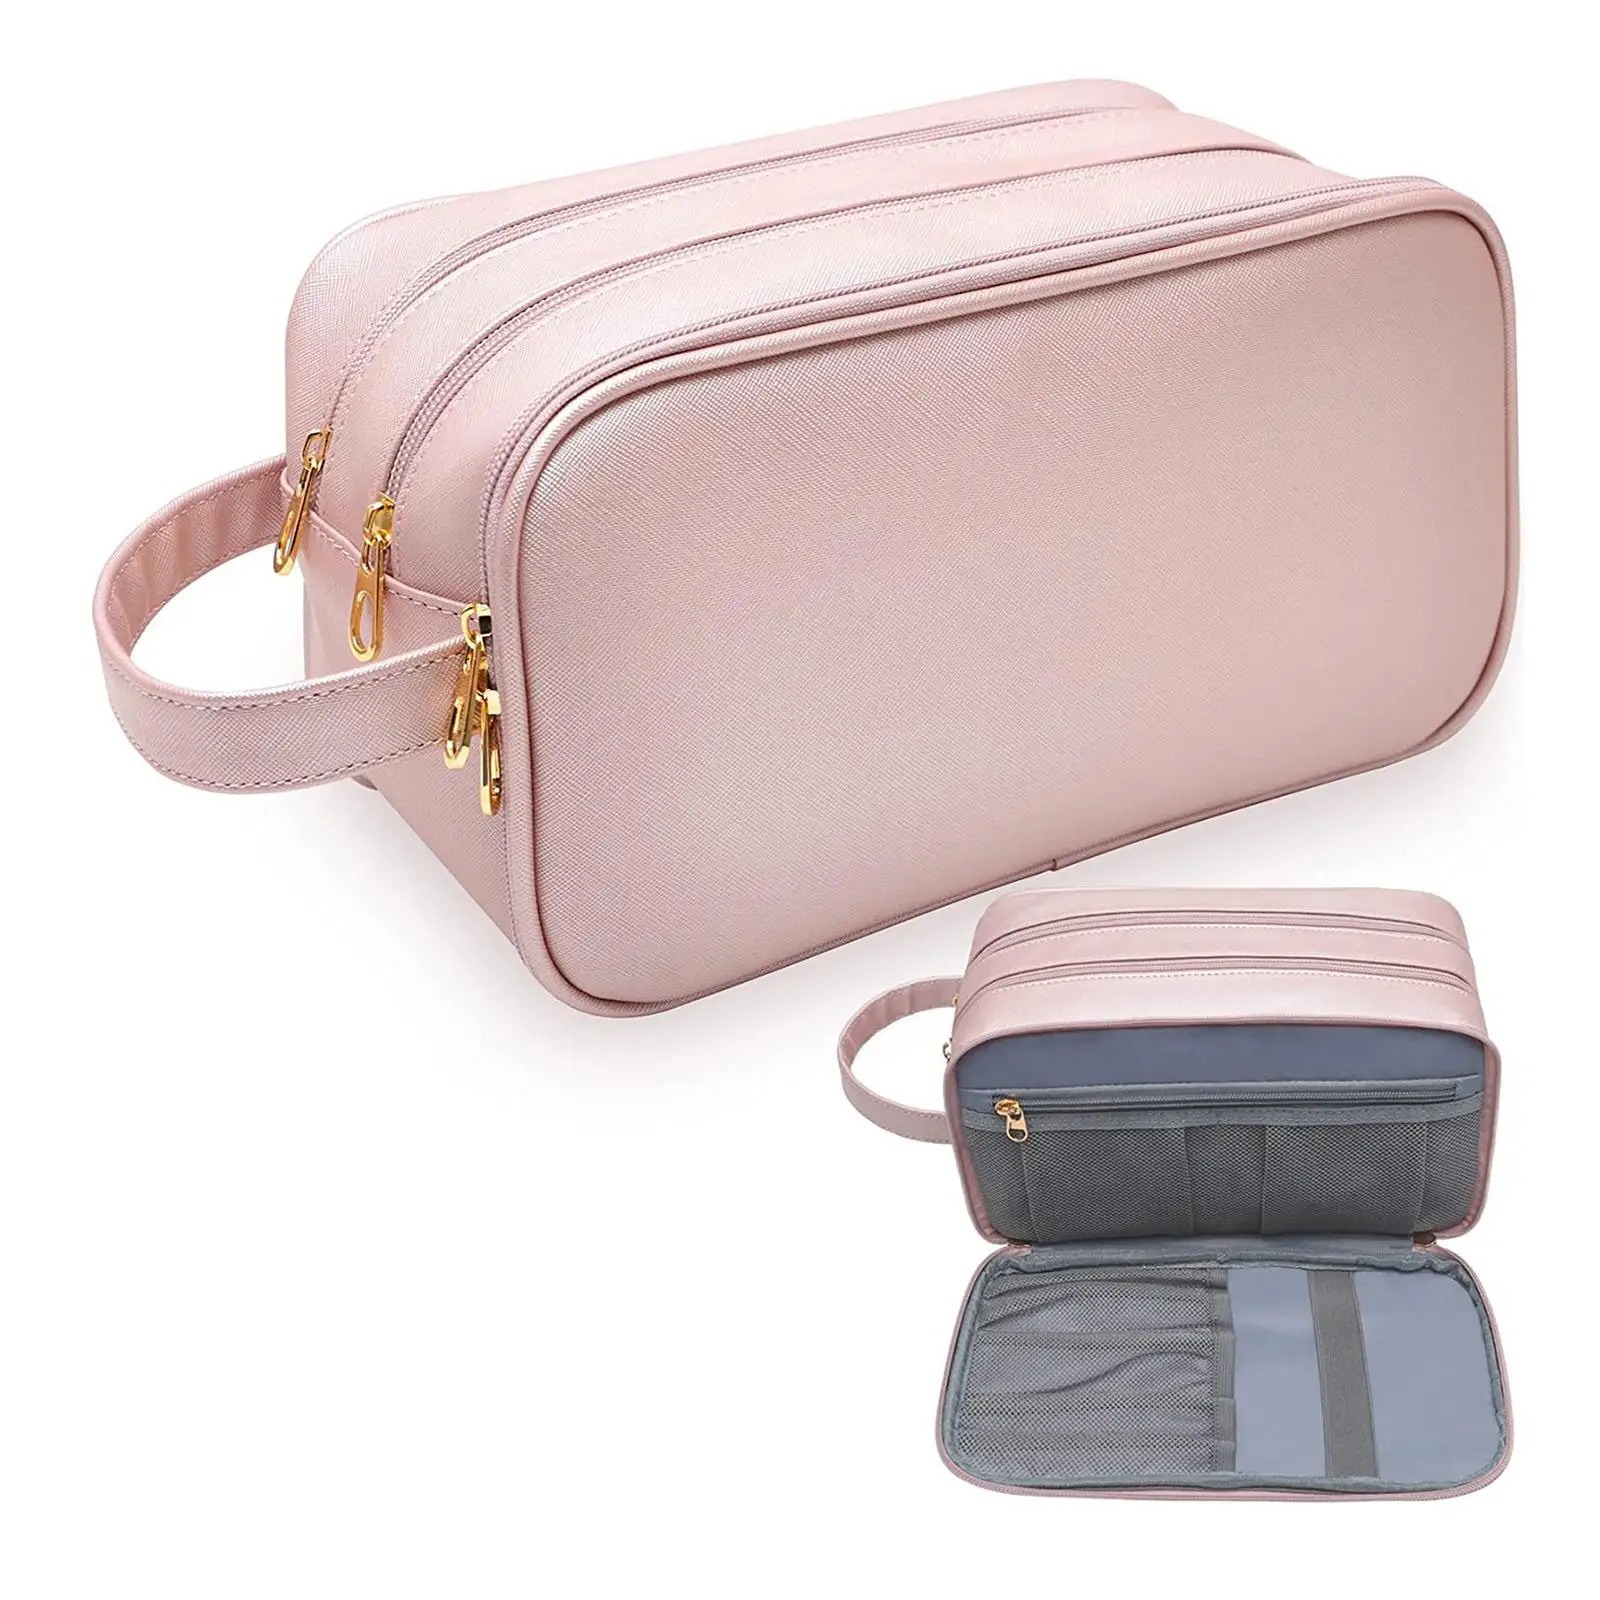 Water Resistant PU Leather Toiletry Bag Dorm Essentials Travel Makeup Bag for Accessories Business for Women Men Bathroom Pink